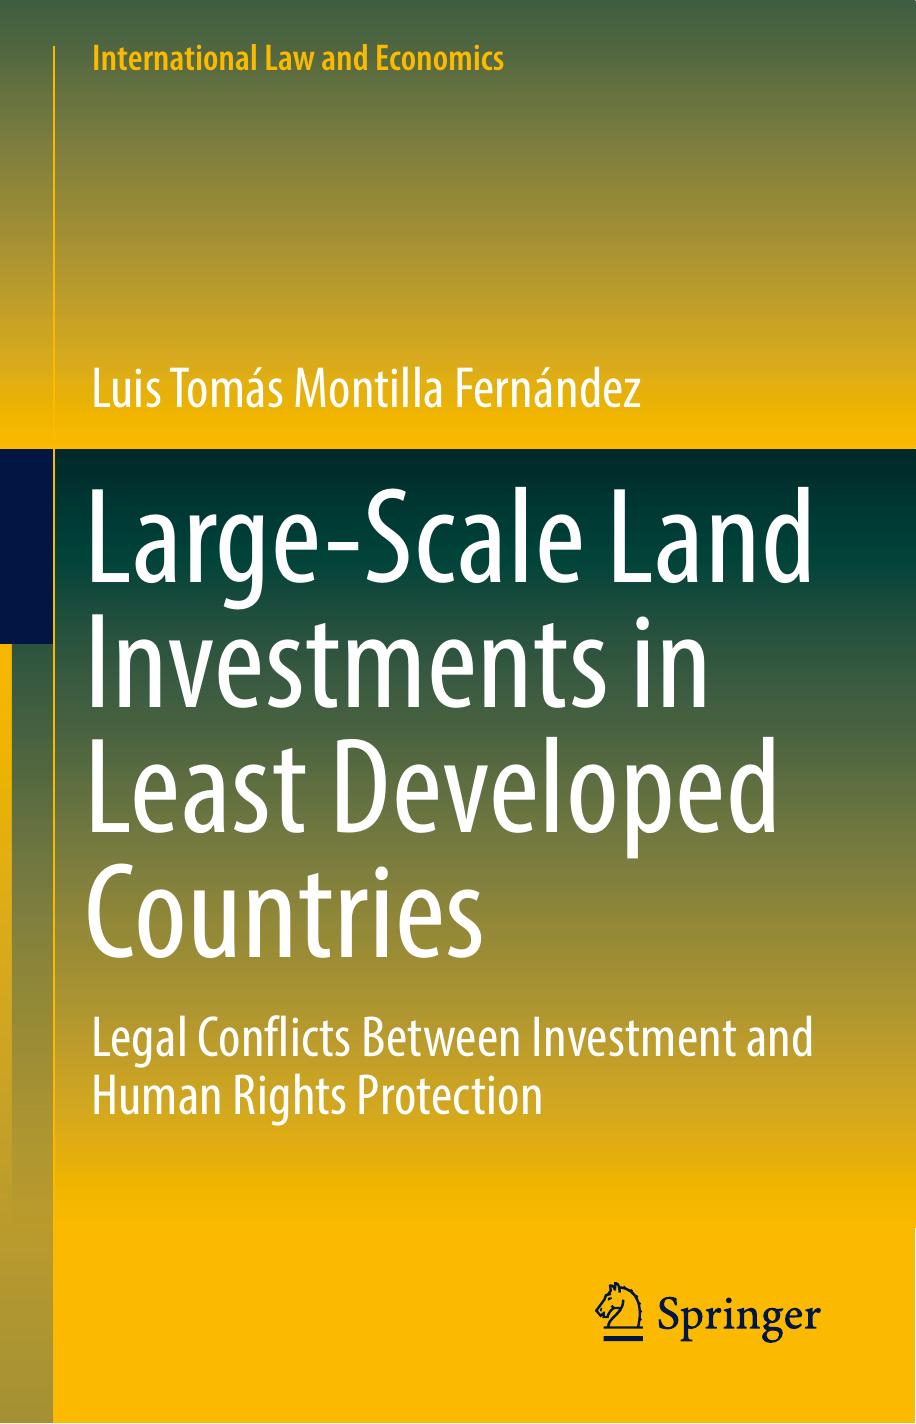 Large-Scale Land Investments in Least Developed Countries,2021